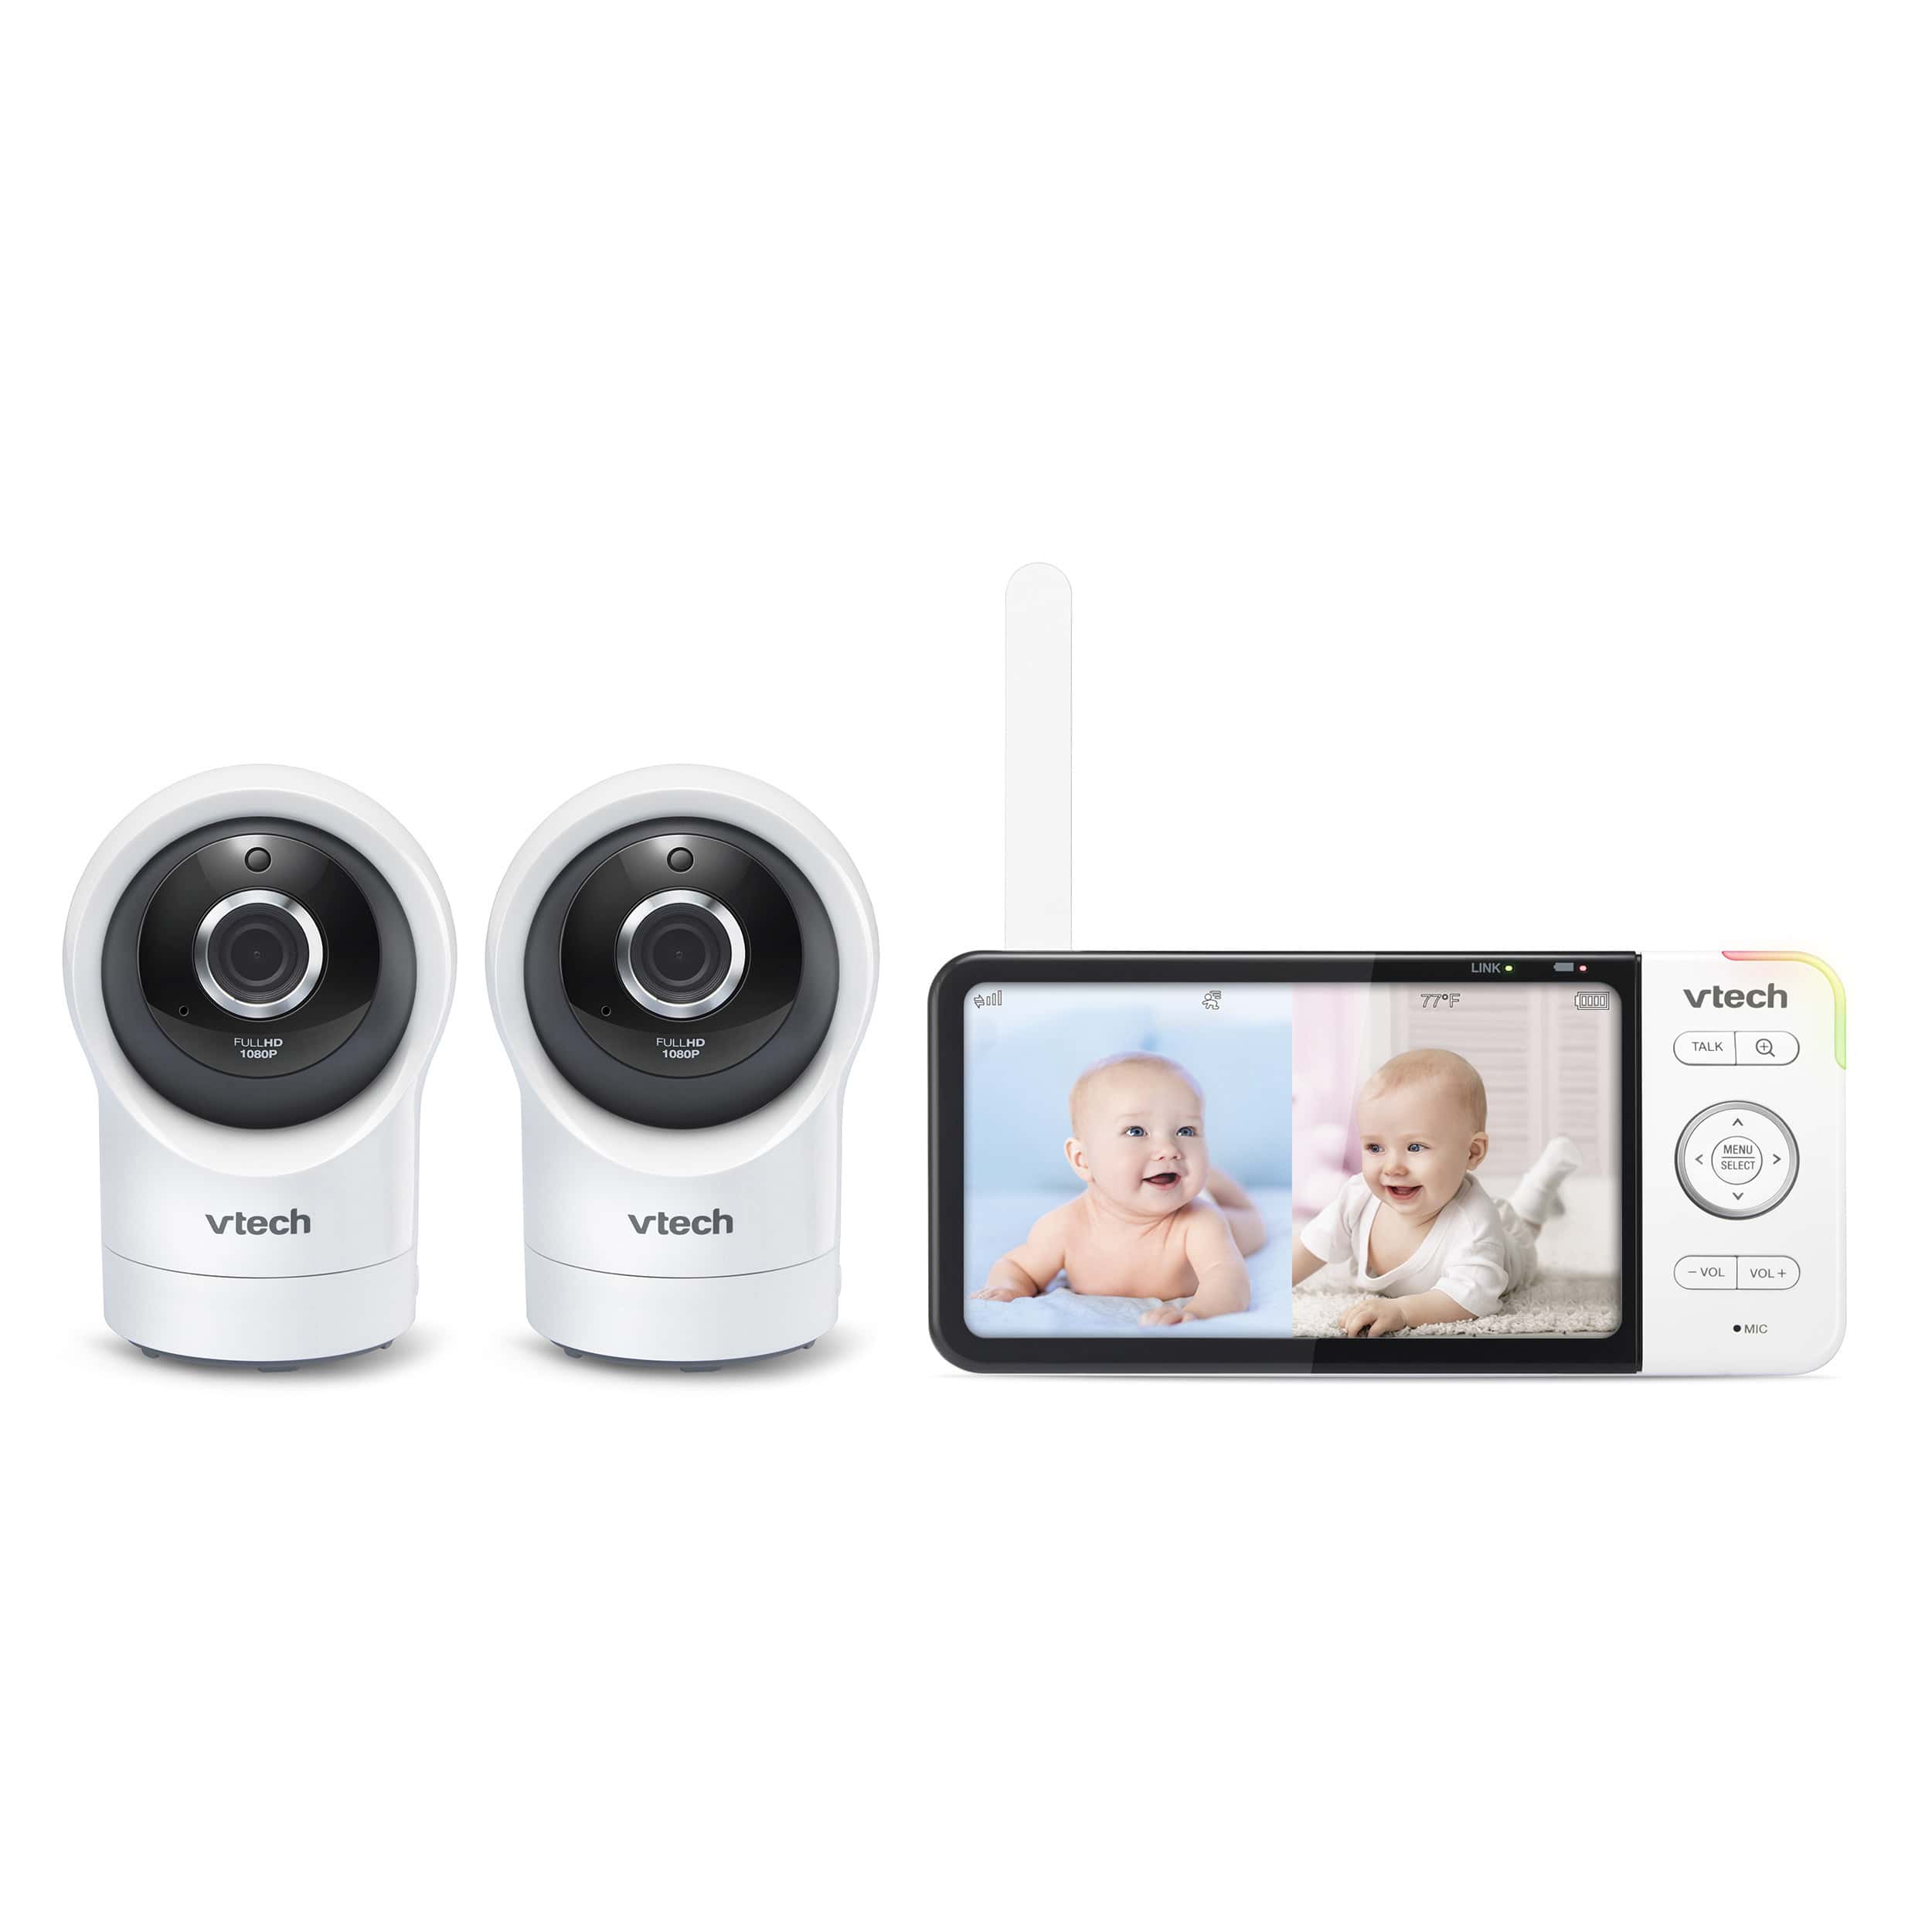 Wi-Fi Remote Access 2 Camera Video Baby Monitor with 5" display and 1080p HD 360 degree Panoramic Viewing Pan & Tilt Camera